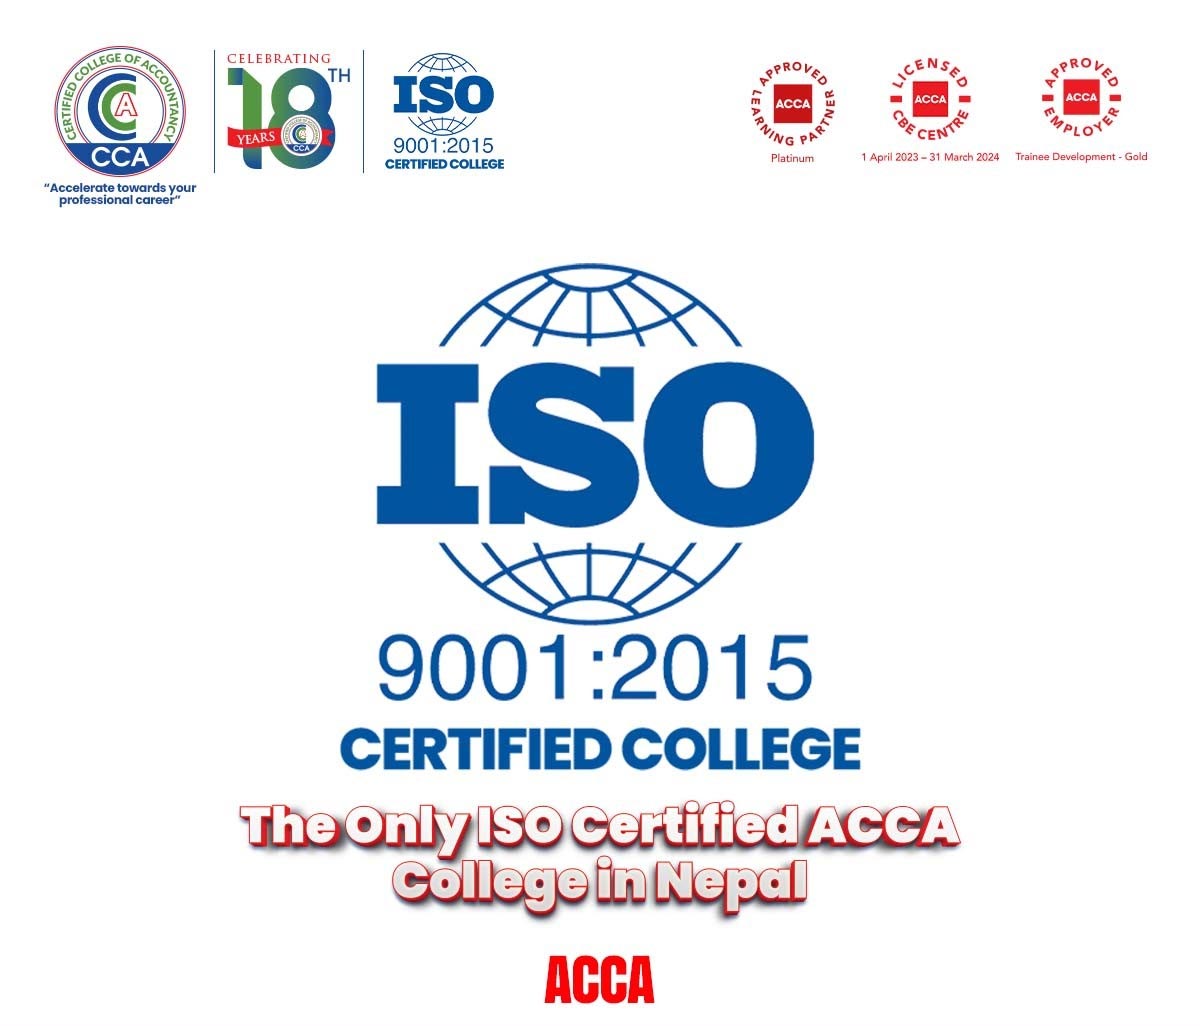 CCA Pioneering Excellence as the First ISO-Certified ACCA College in Nepal